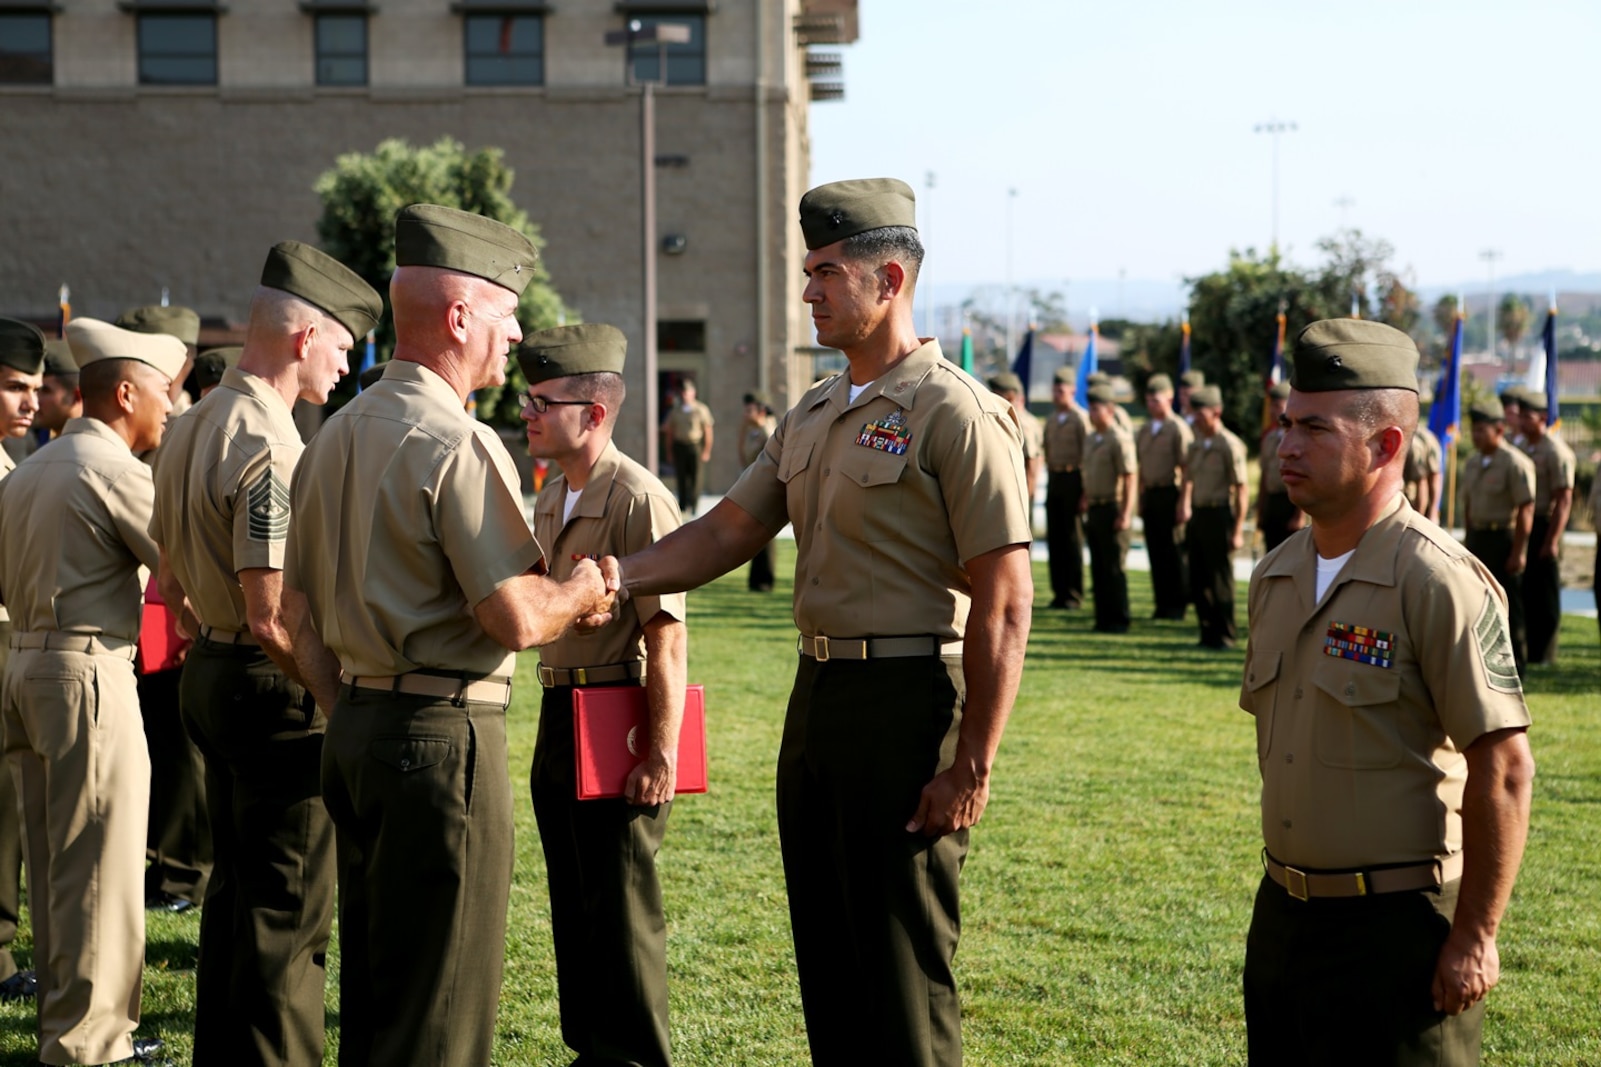 U.S. Marine Brig. Gen. David A. Ottignon greets and presents the Marine Corps Engineer Association Award to Capt. Juan Rodriguez at the 1st Marine Logistics Group quarterly awards ceremony aboard Camp Pendleton Calif., July 29, 2016. Ottignon is the 1st MLG commanding general and Rodriguez is the executive officer of 1st Explosive Ordnance Disposal Company, 7th Engineer Support Battalion. Rodriguez was one of the Marines recognized at the ceremony for their outstanding achievements in the performance of their duties for the fiscal year 2016 third quarter. (U.S. Marine Corps photo by Sgt. Carson Gramley/released)